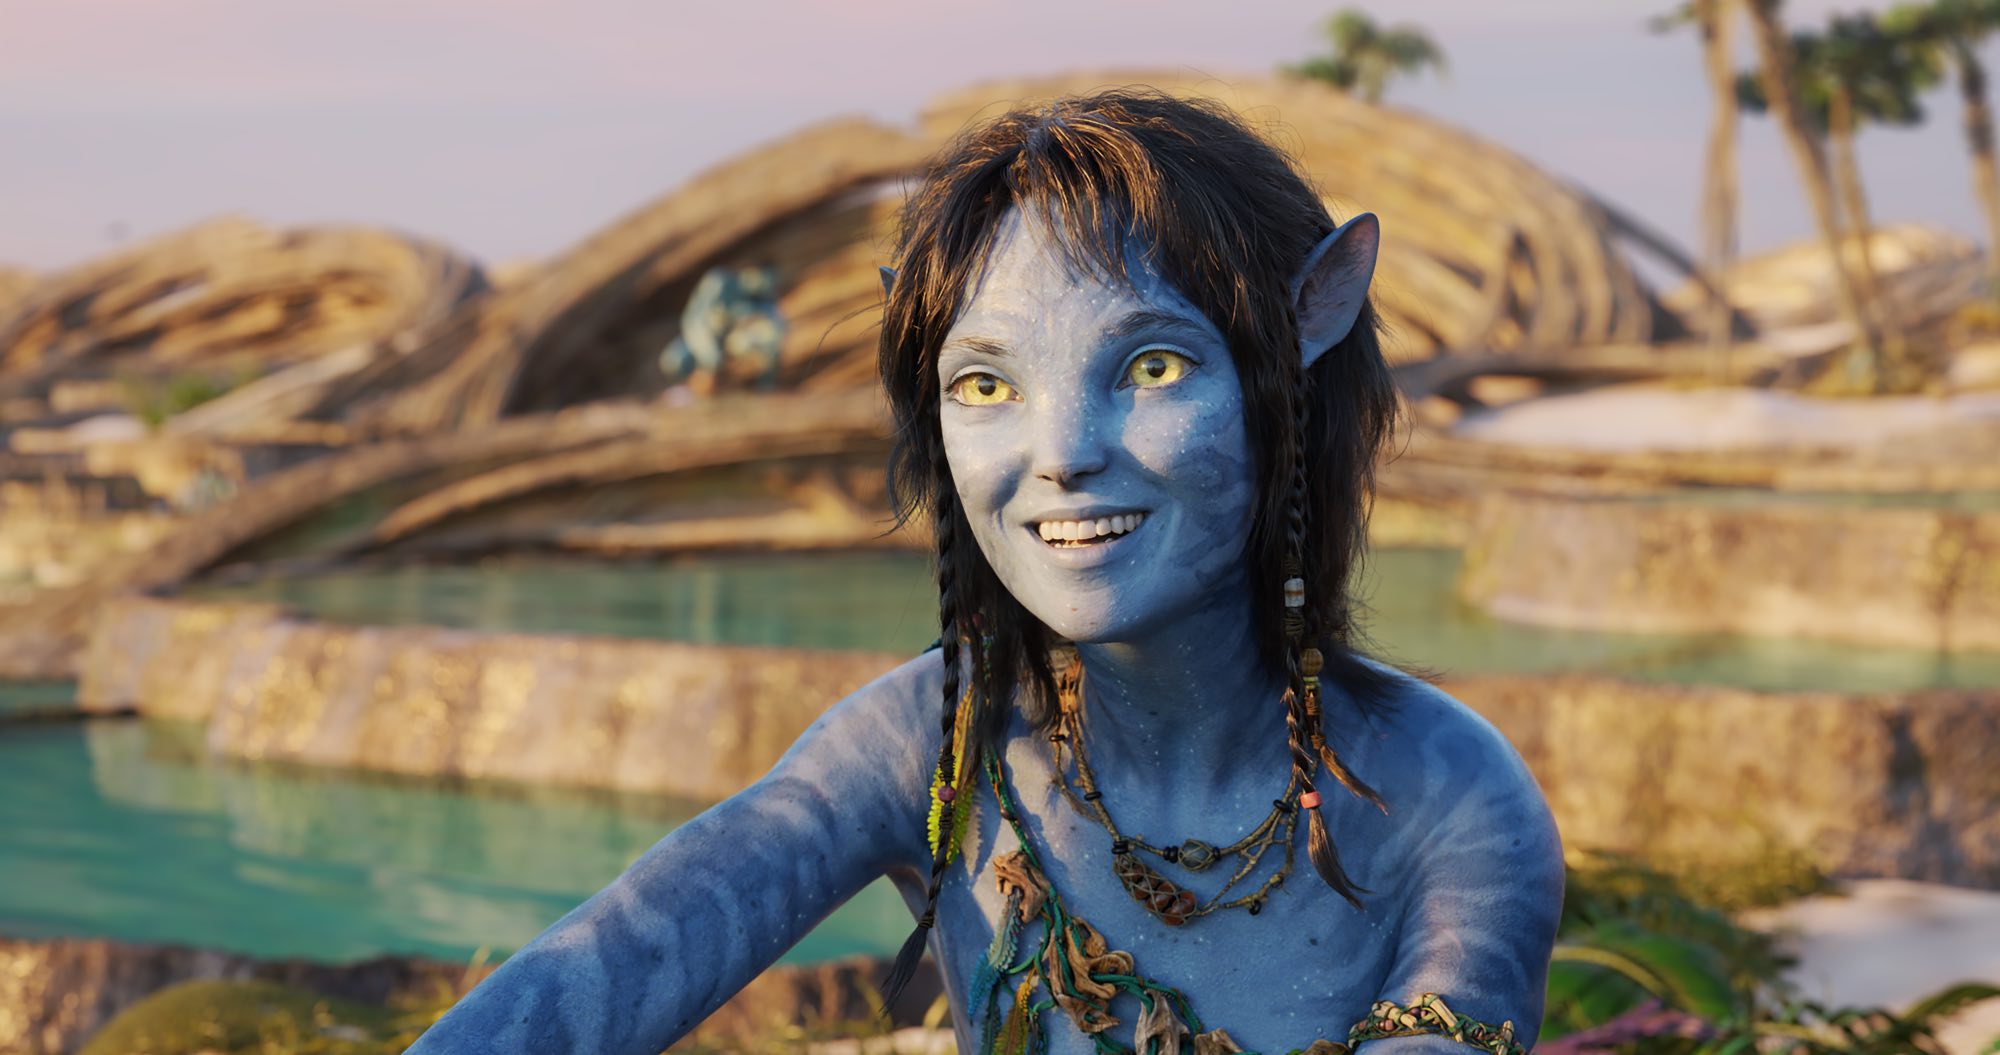 Oscars 2023 Best Picture nominee 'Avatar: The Way of Water' Sigourney Weaver as Kiri smiling in front of pools of water.